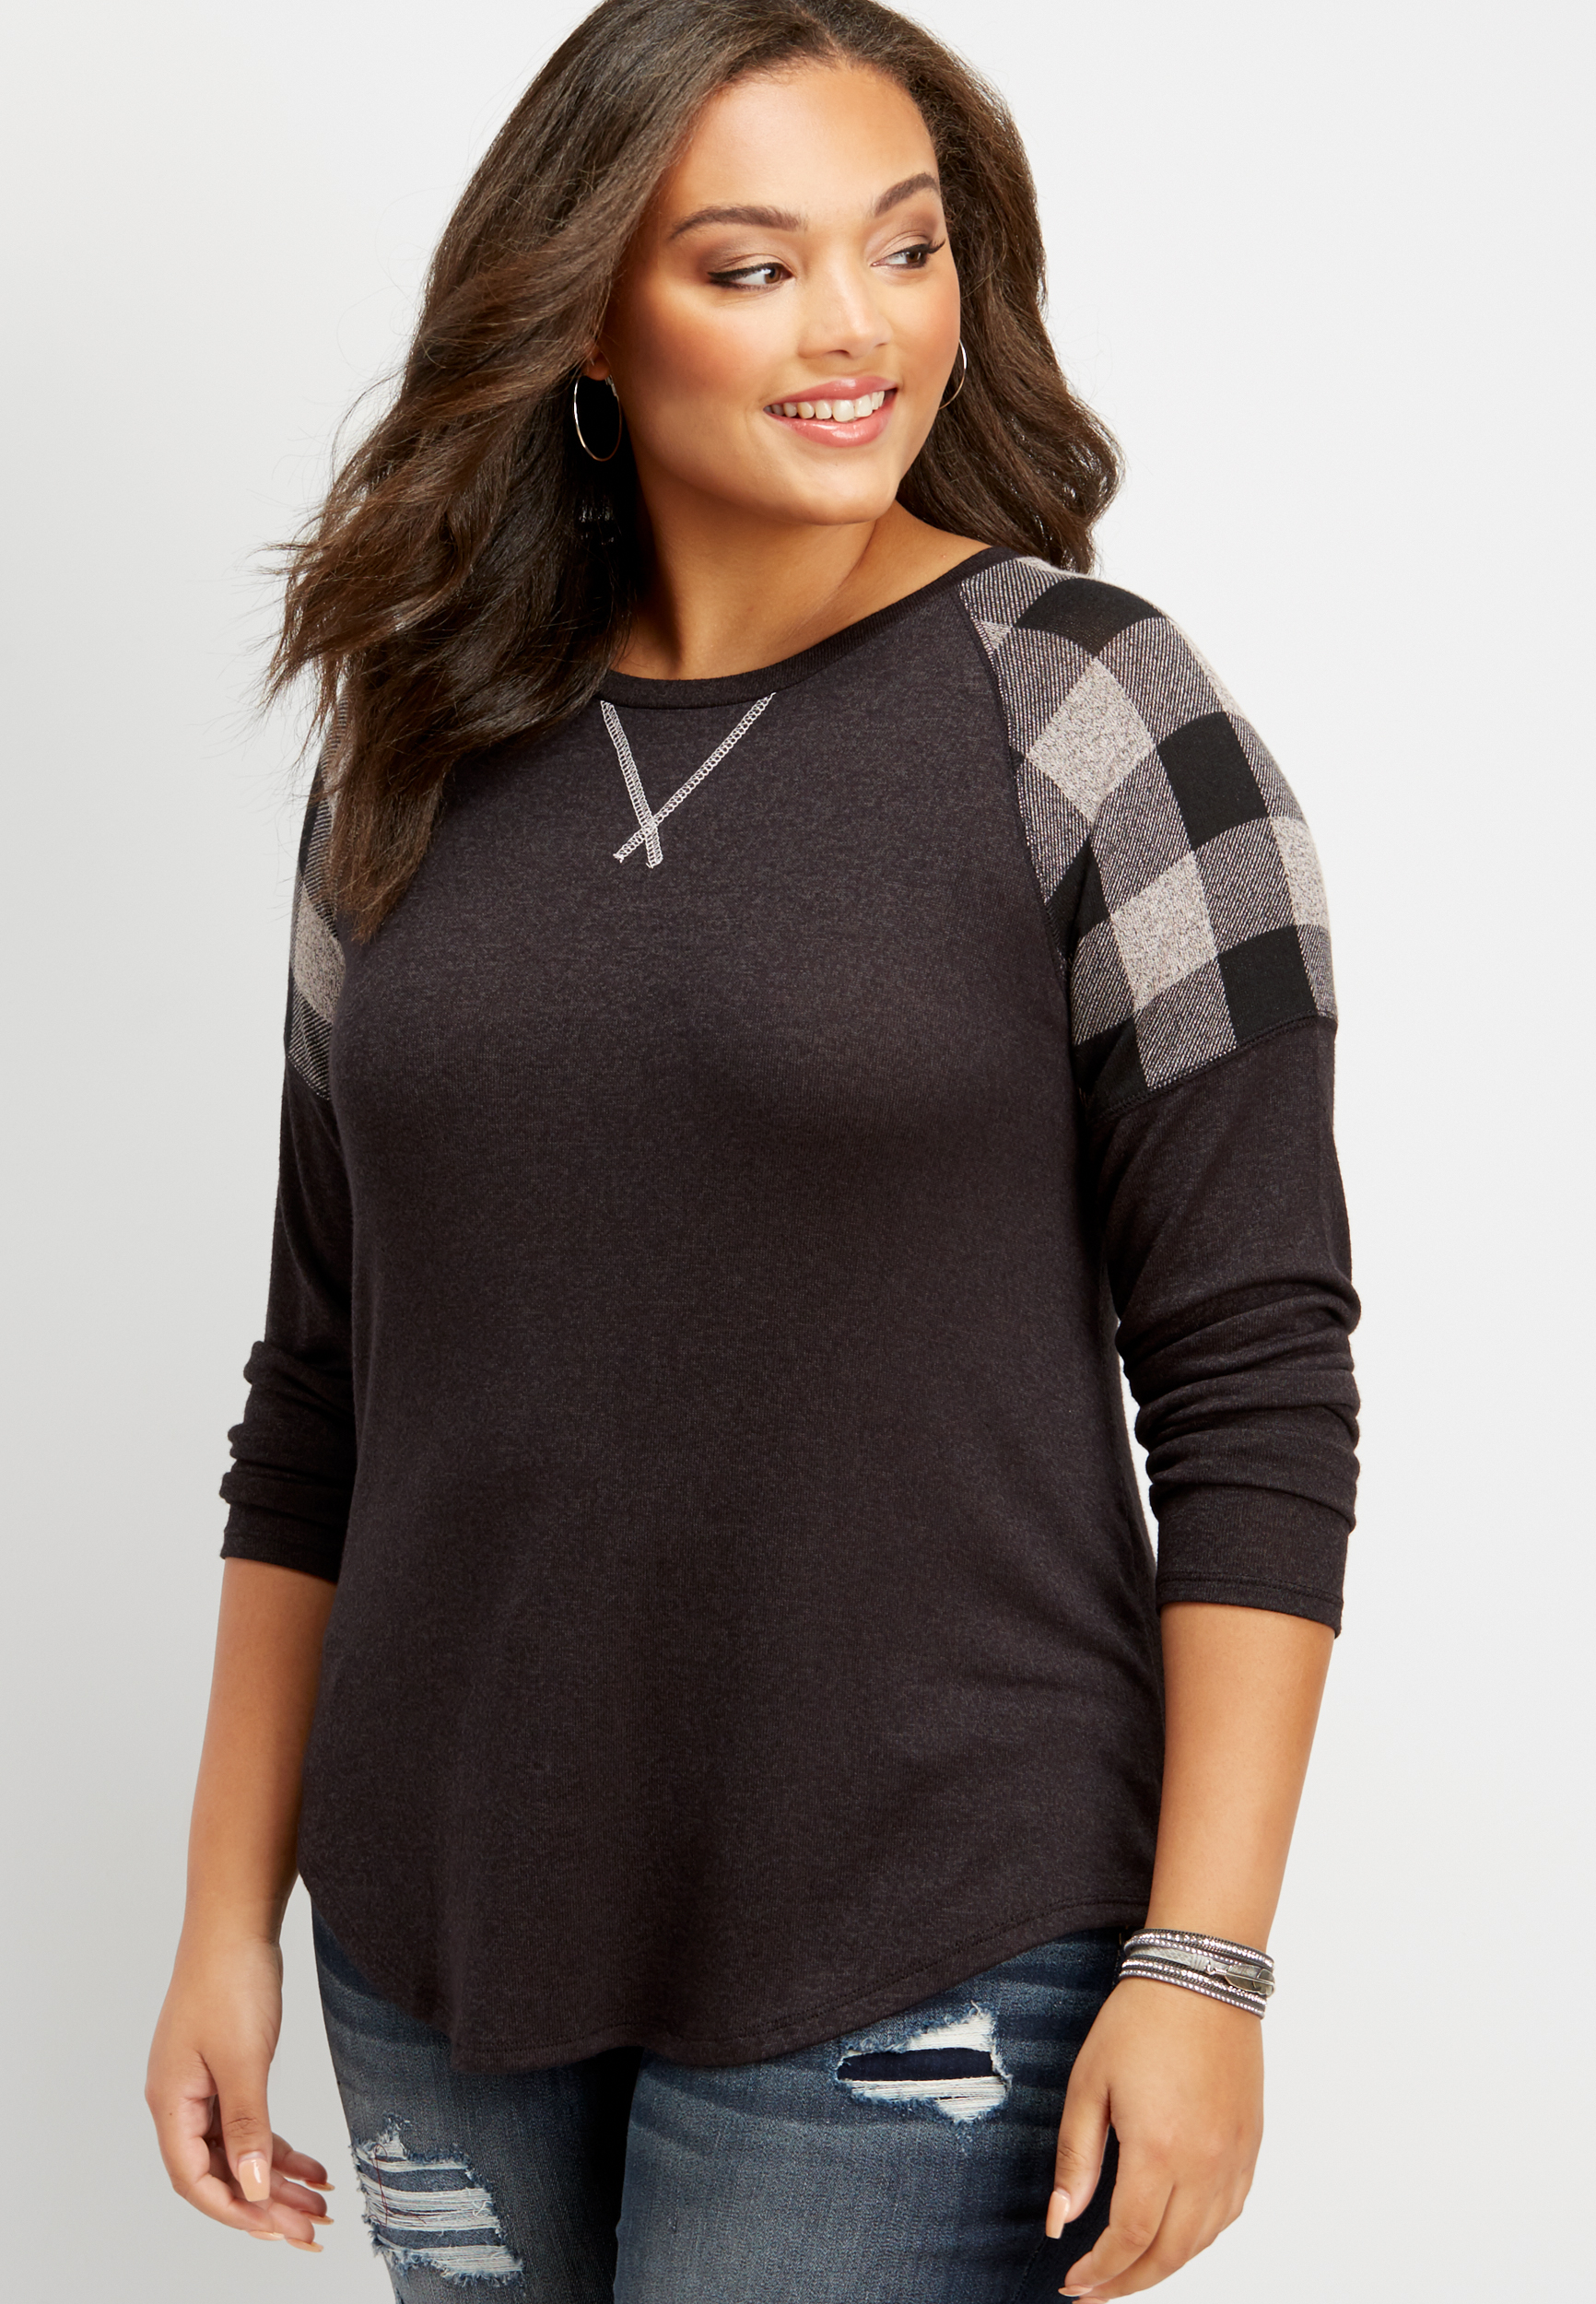 Plus Size Tops | maurices